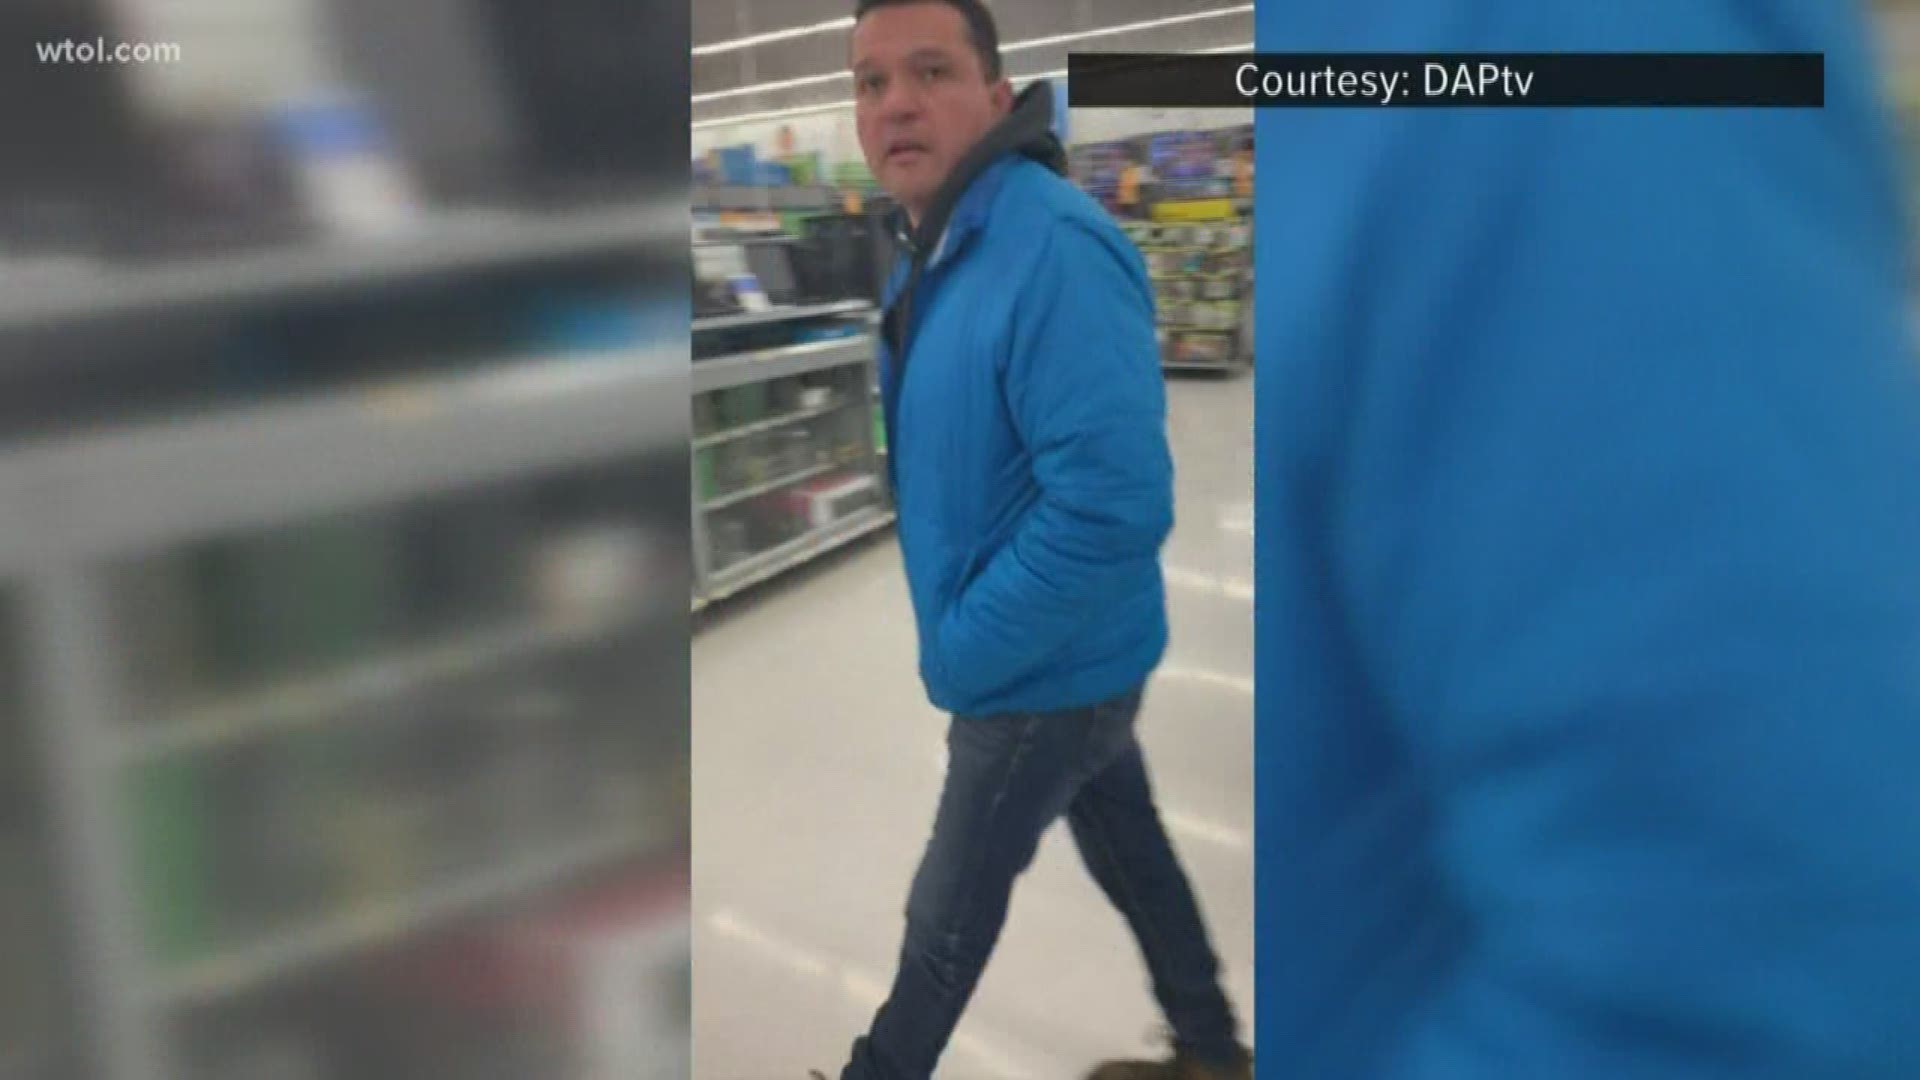 Rafael Valadez-Loera, 39, is charged with violating his immigration status. The video shows a man being confronted by a group of men inside Walmart.